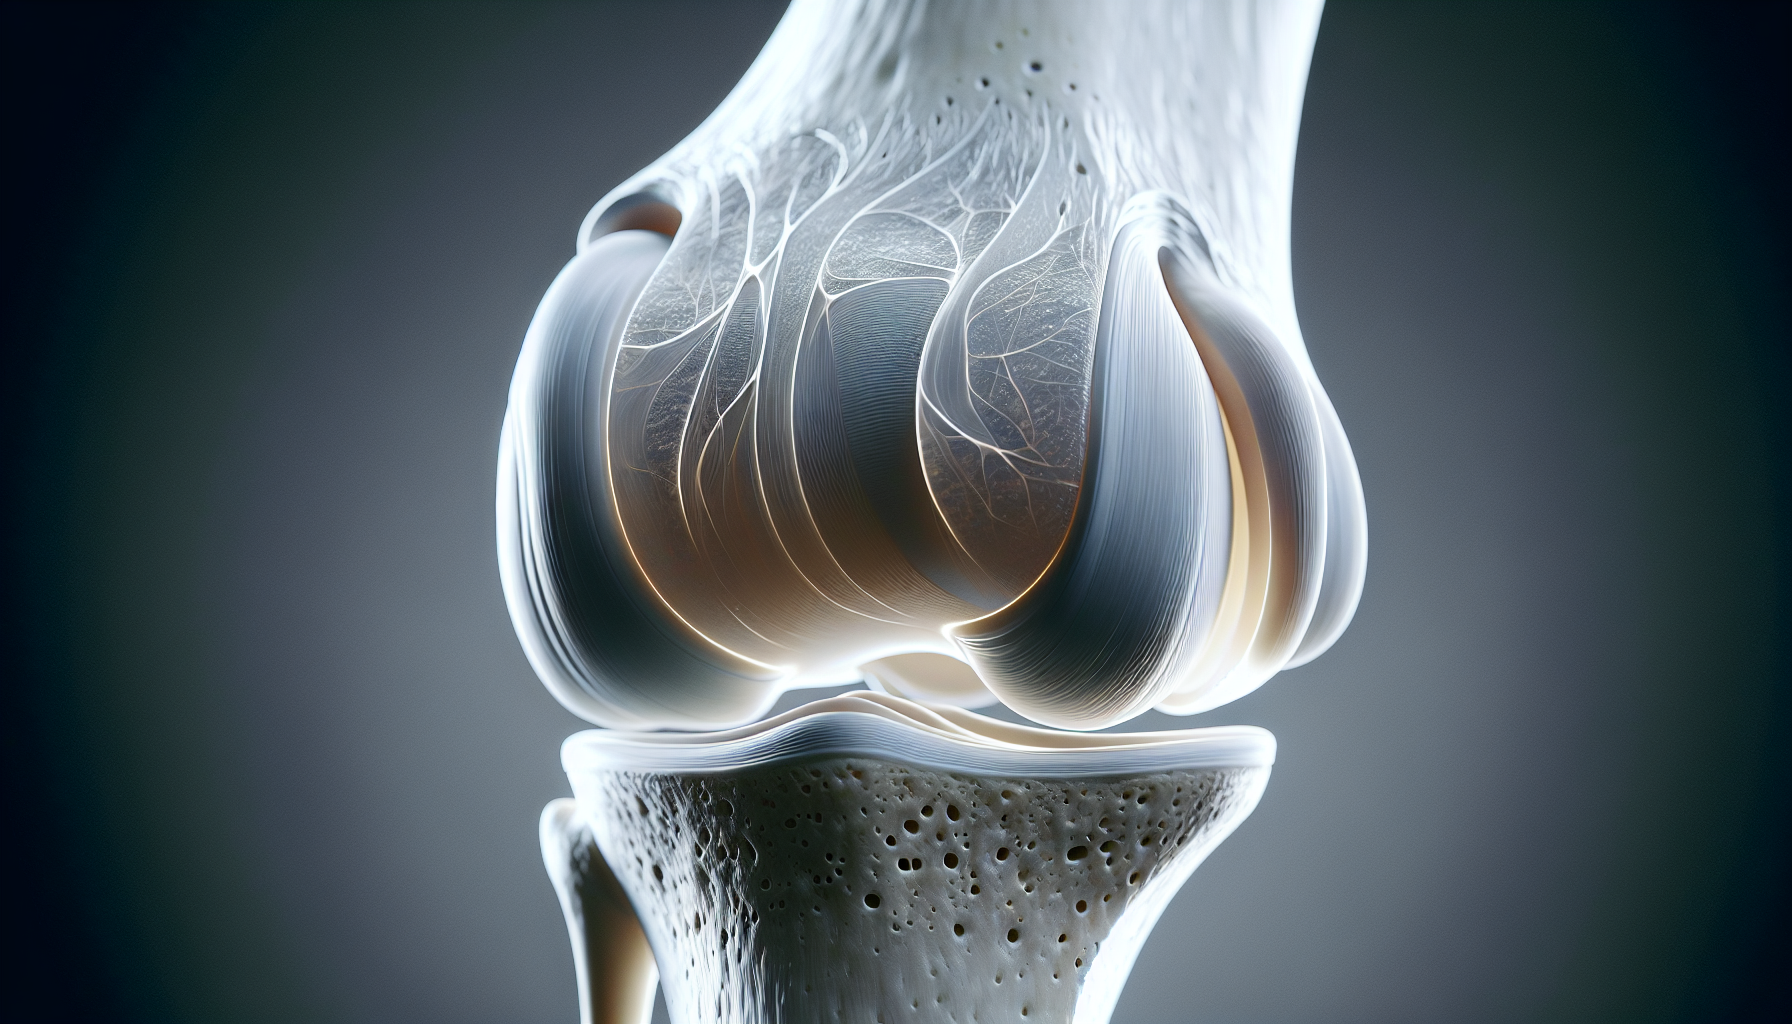 Illustration of healthy knee joint cartilage